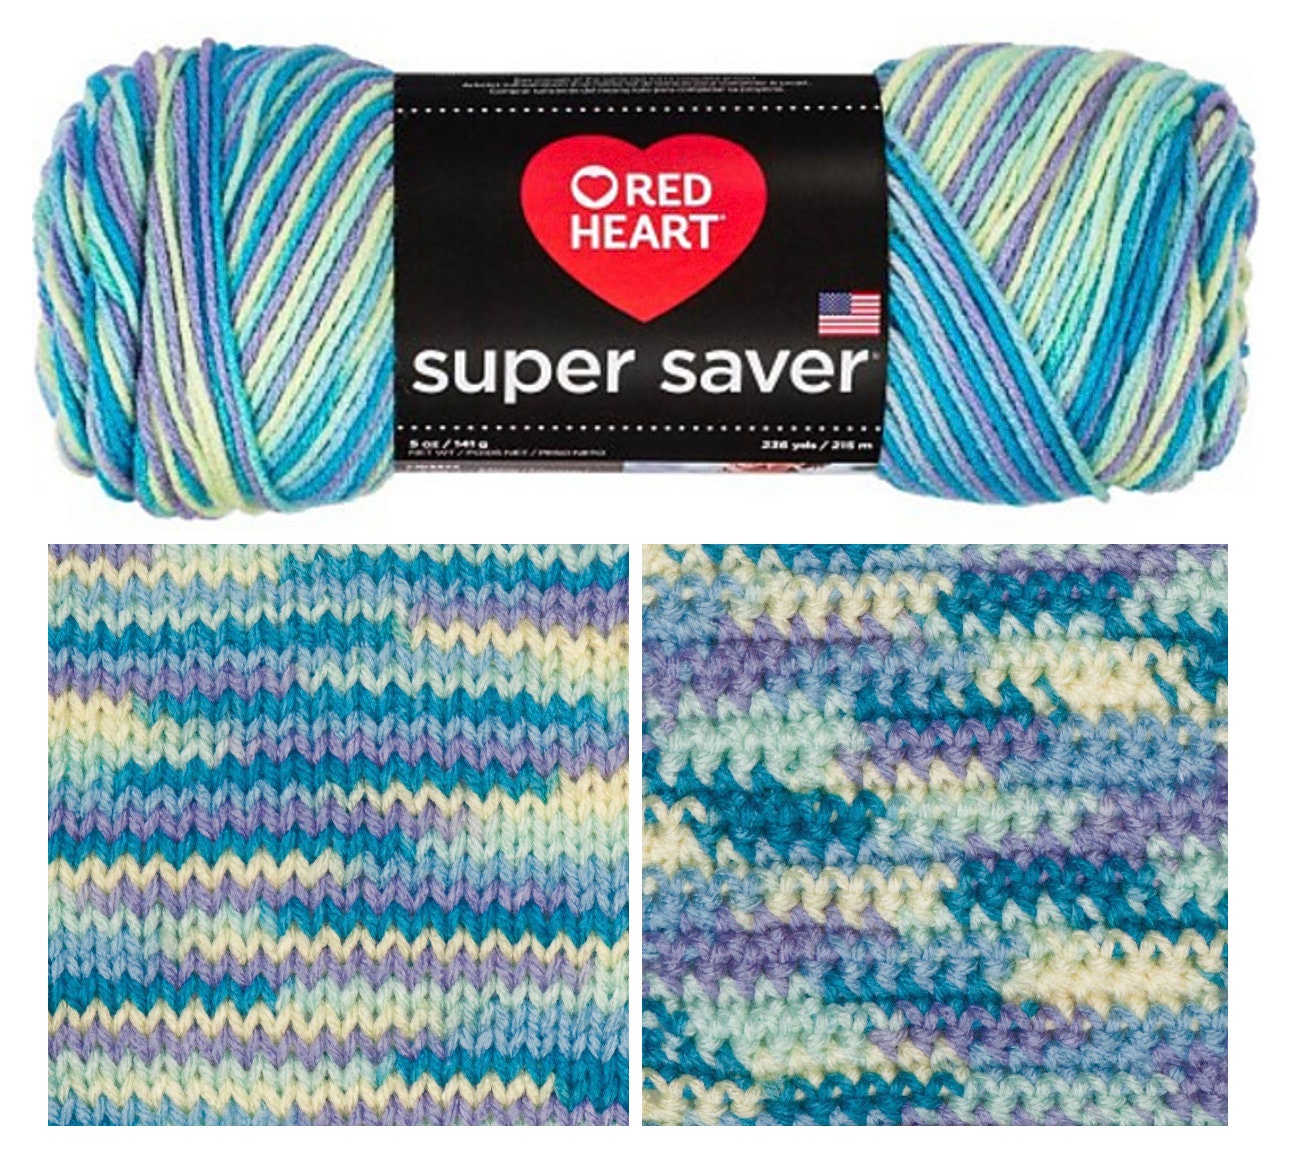 Stillwater Pooling, Red Heart Super Saver Yarn, 5oz/236 Yds, Acrylic  Worsted 4 Variegated, Calm Neutral Colors, Low & Quick Ship 